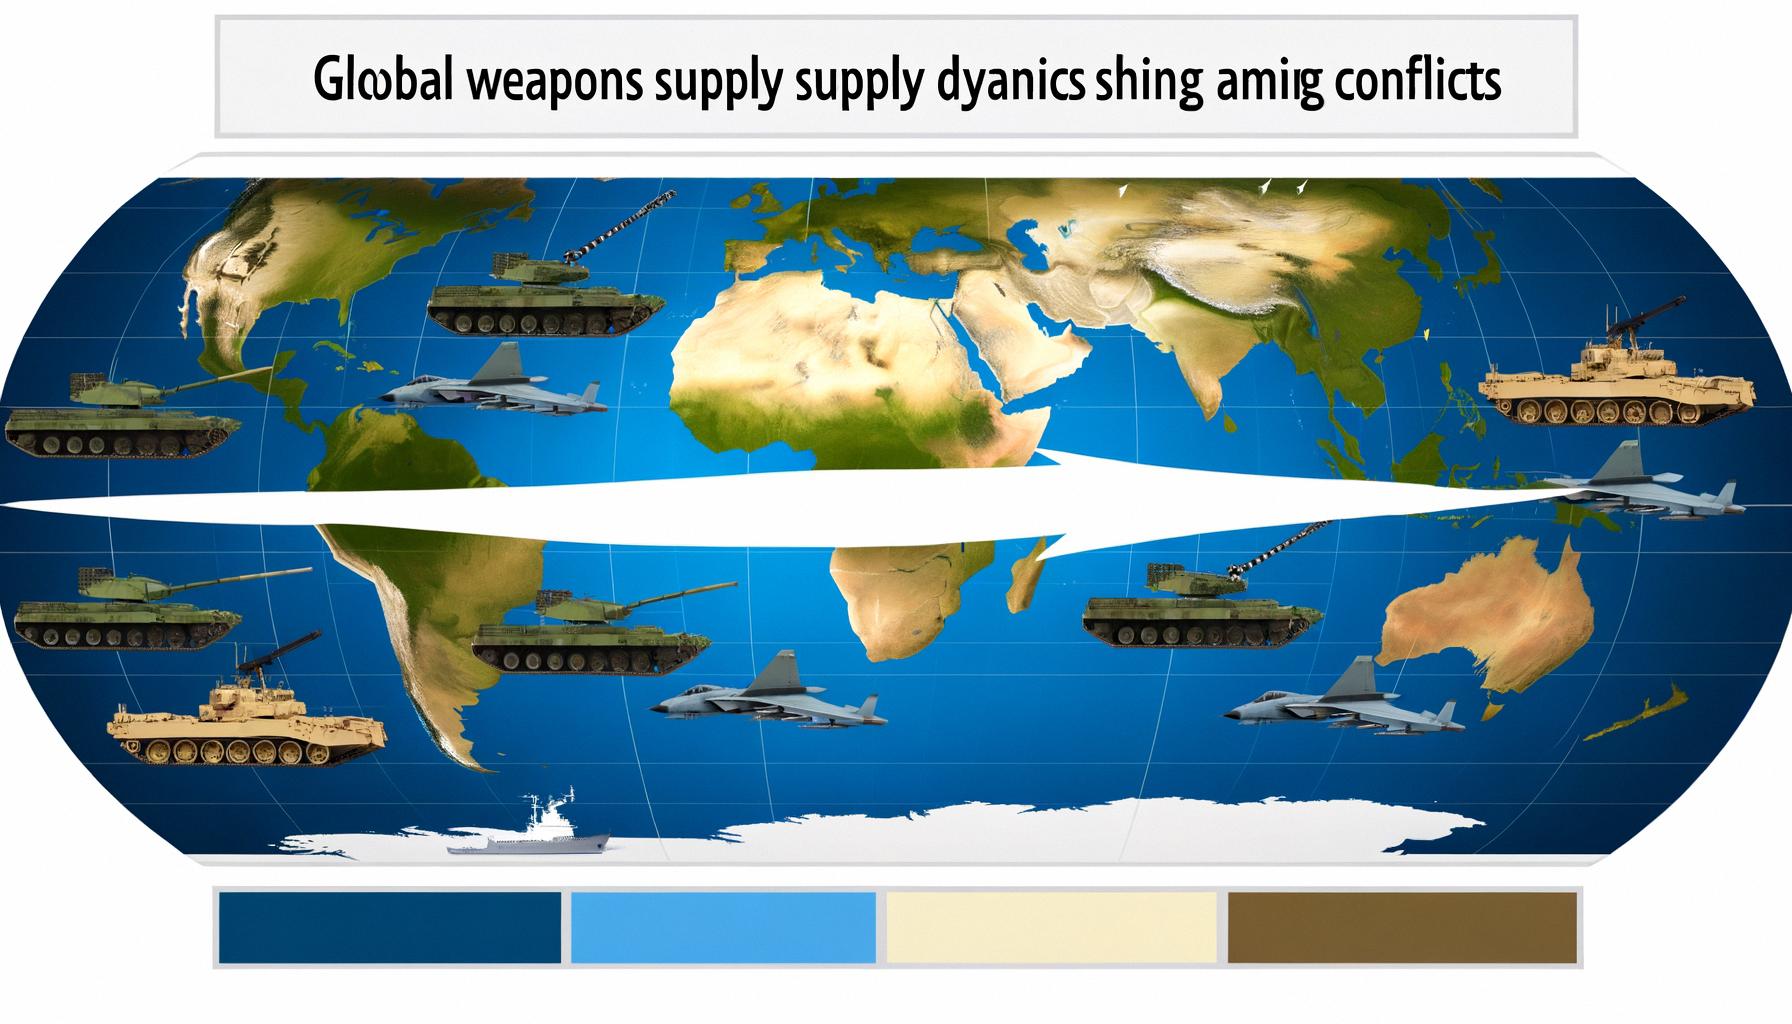 Global weapons supply dynamics shift amid conflicts